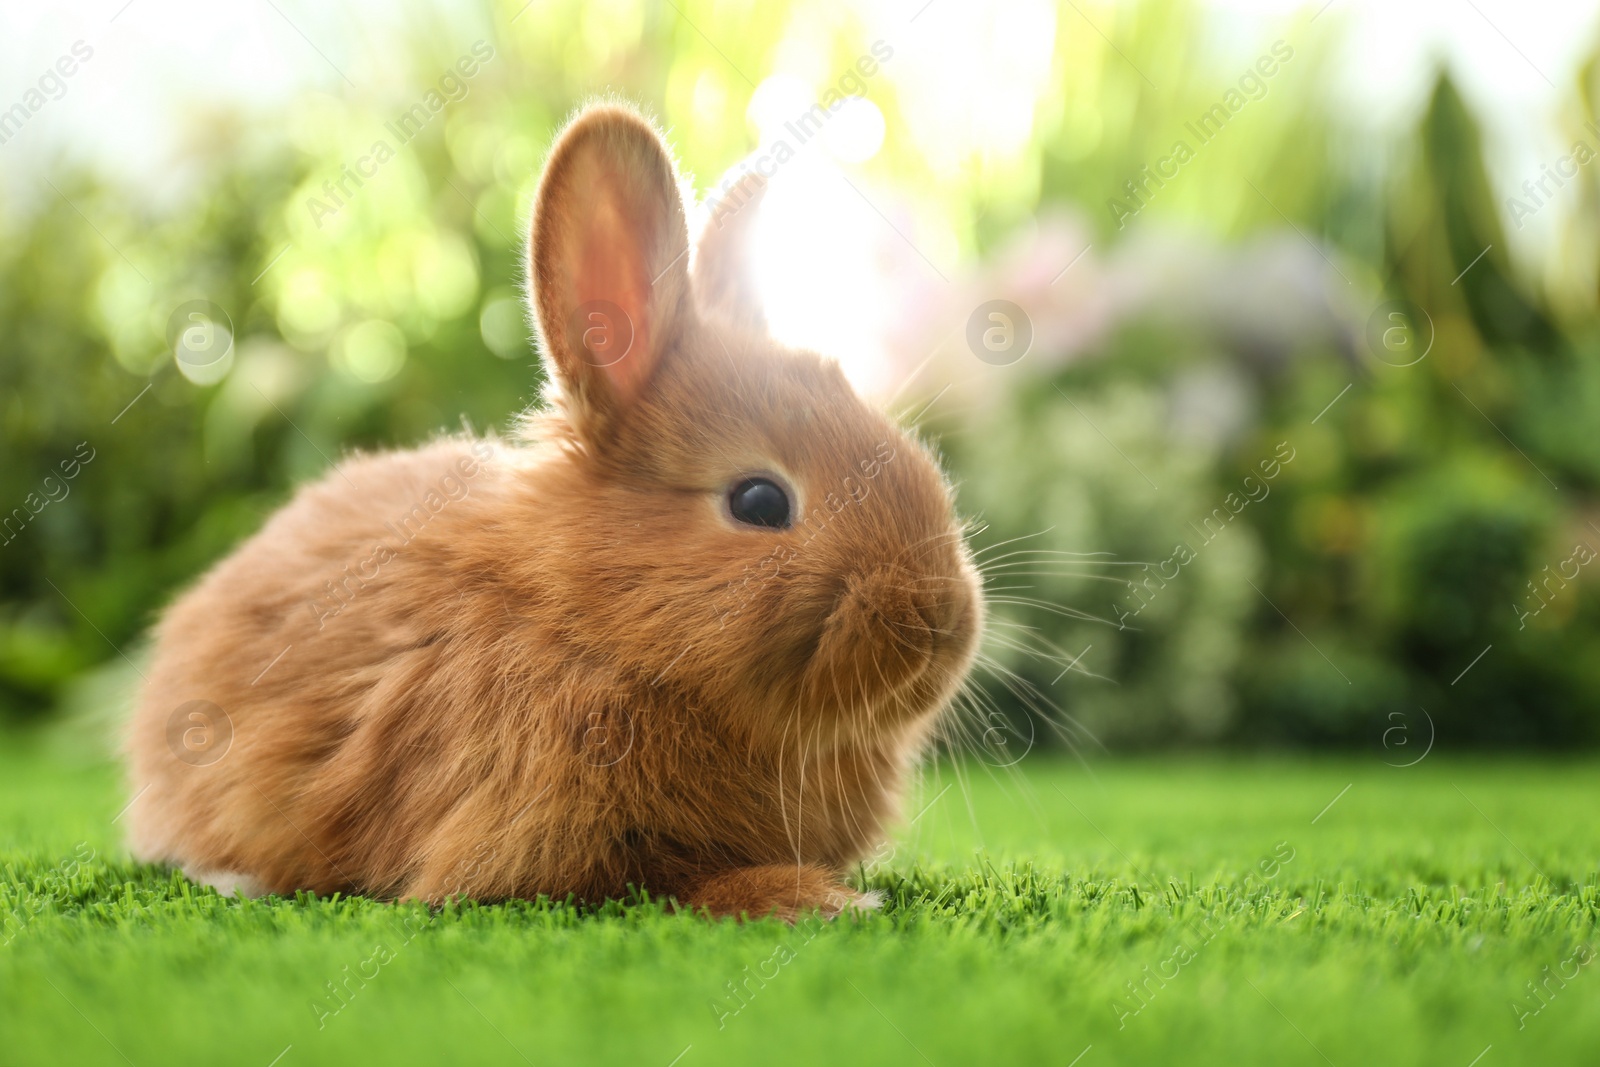 Photo of Adorable fluffy bunny on green grass against blurred background, space for text. Easter symbol